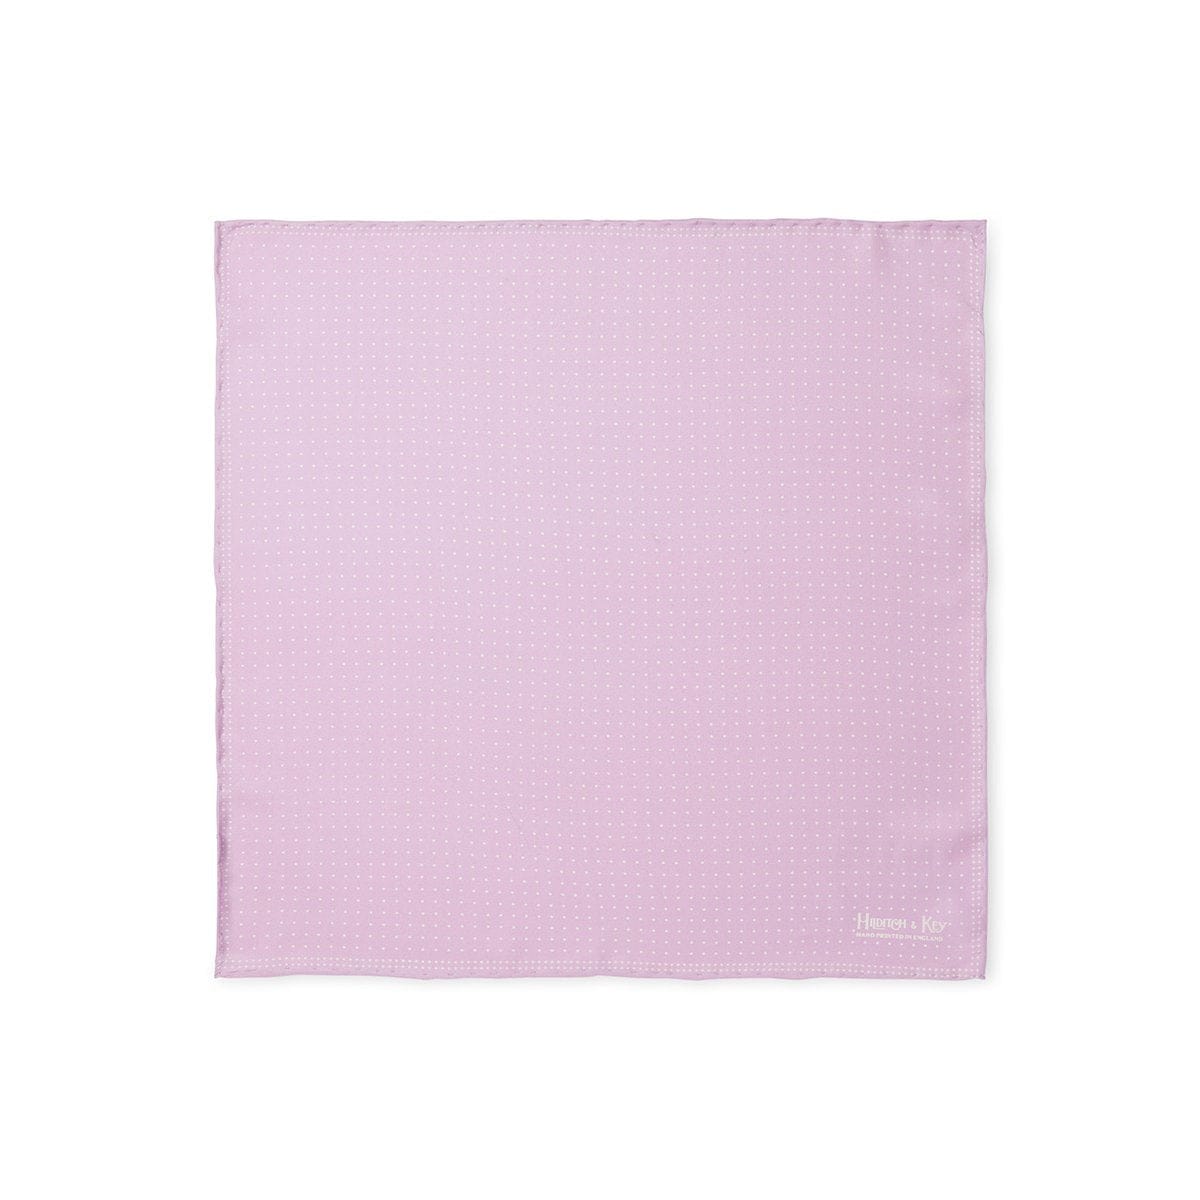 Pink With Small White Pin Dot Spots Silk Handkerchief